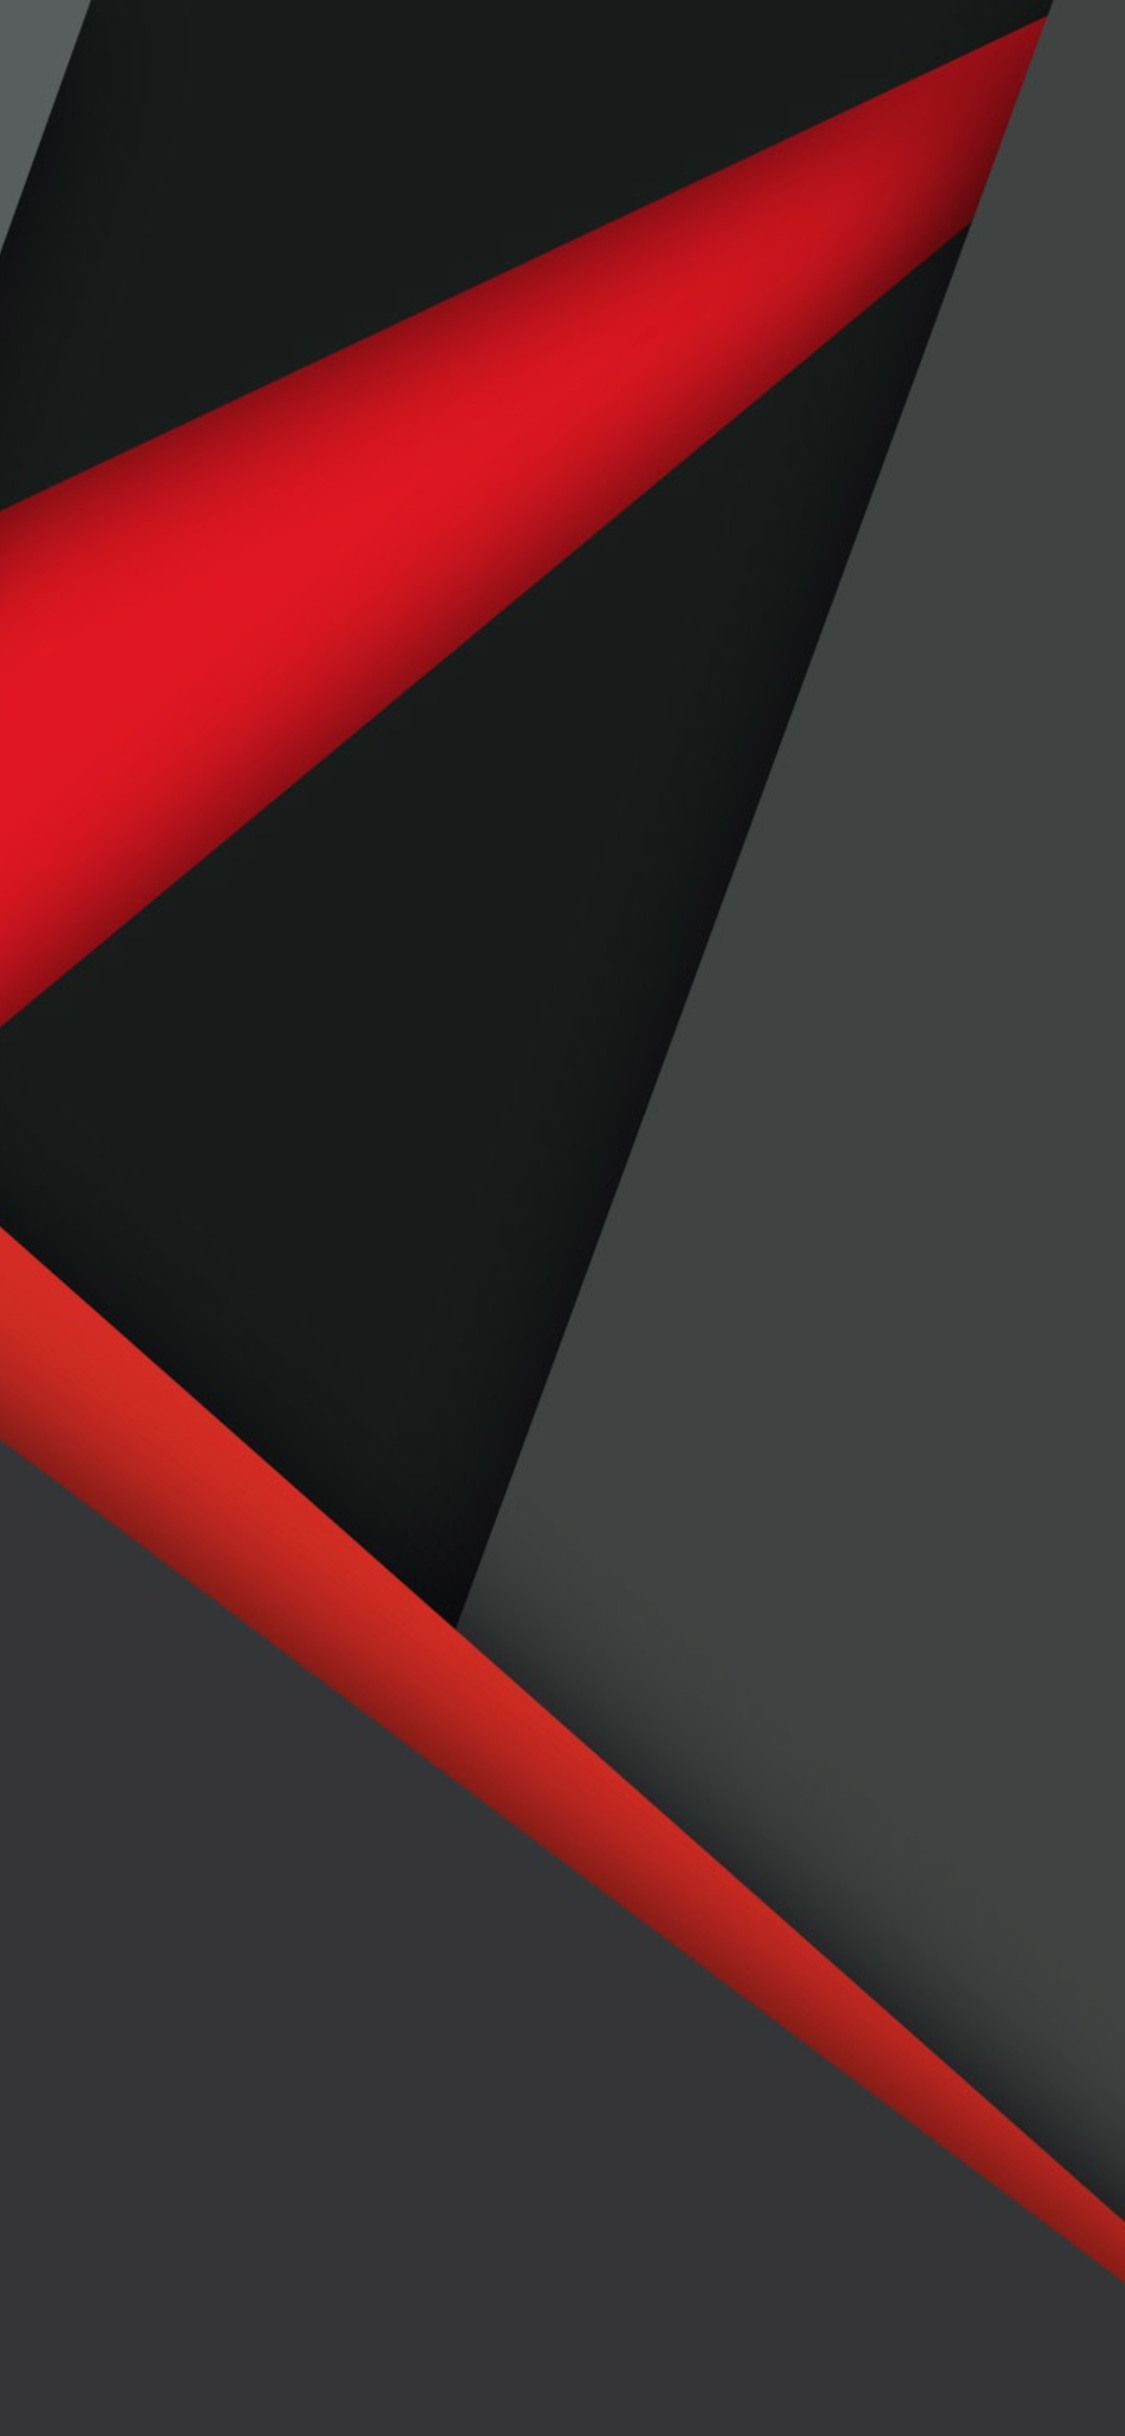 4K Red and Black iPhone Wallpaper Free 4K Red and Black iPhone Background